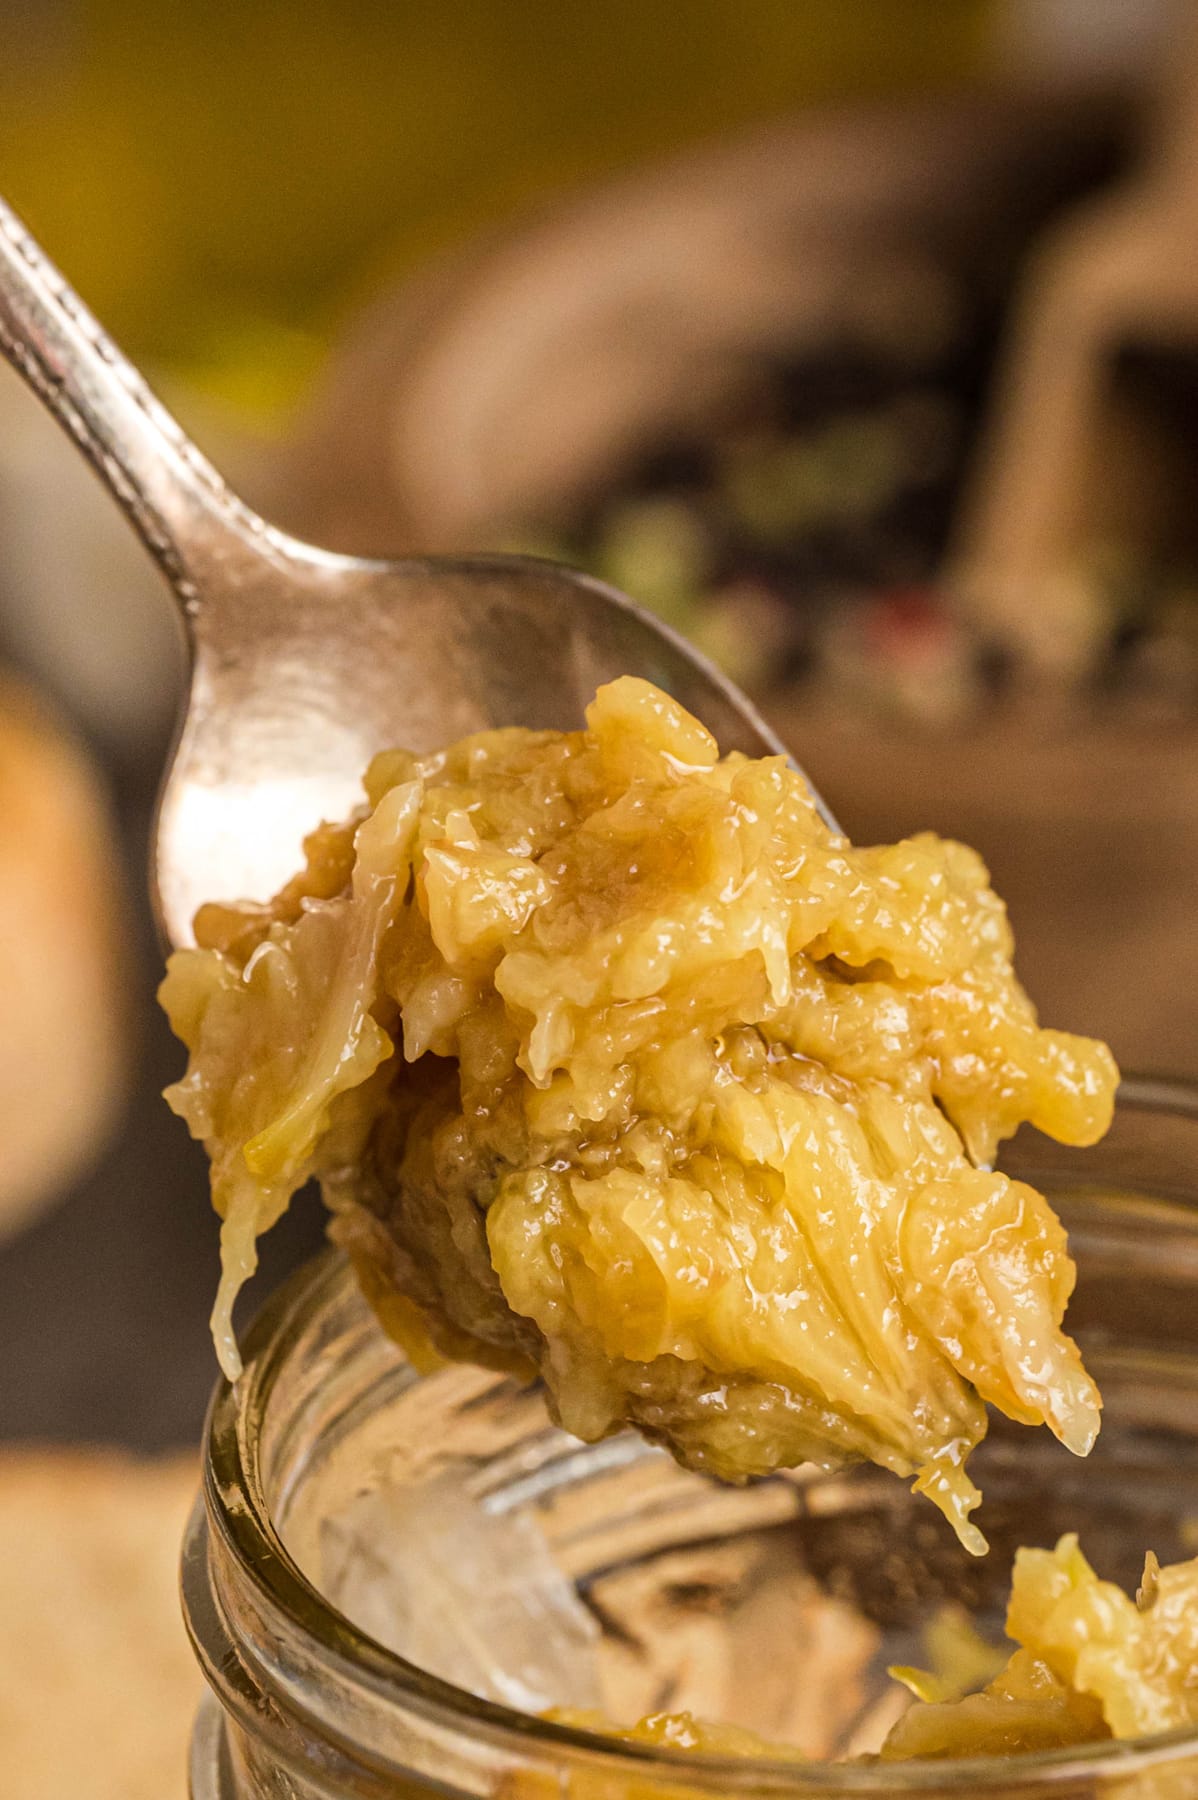 A spoonful of roasted garlic confit